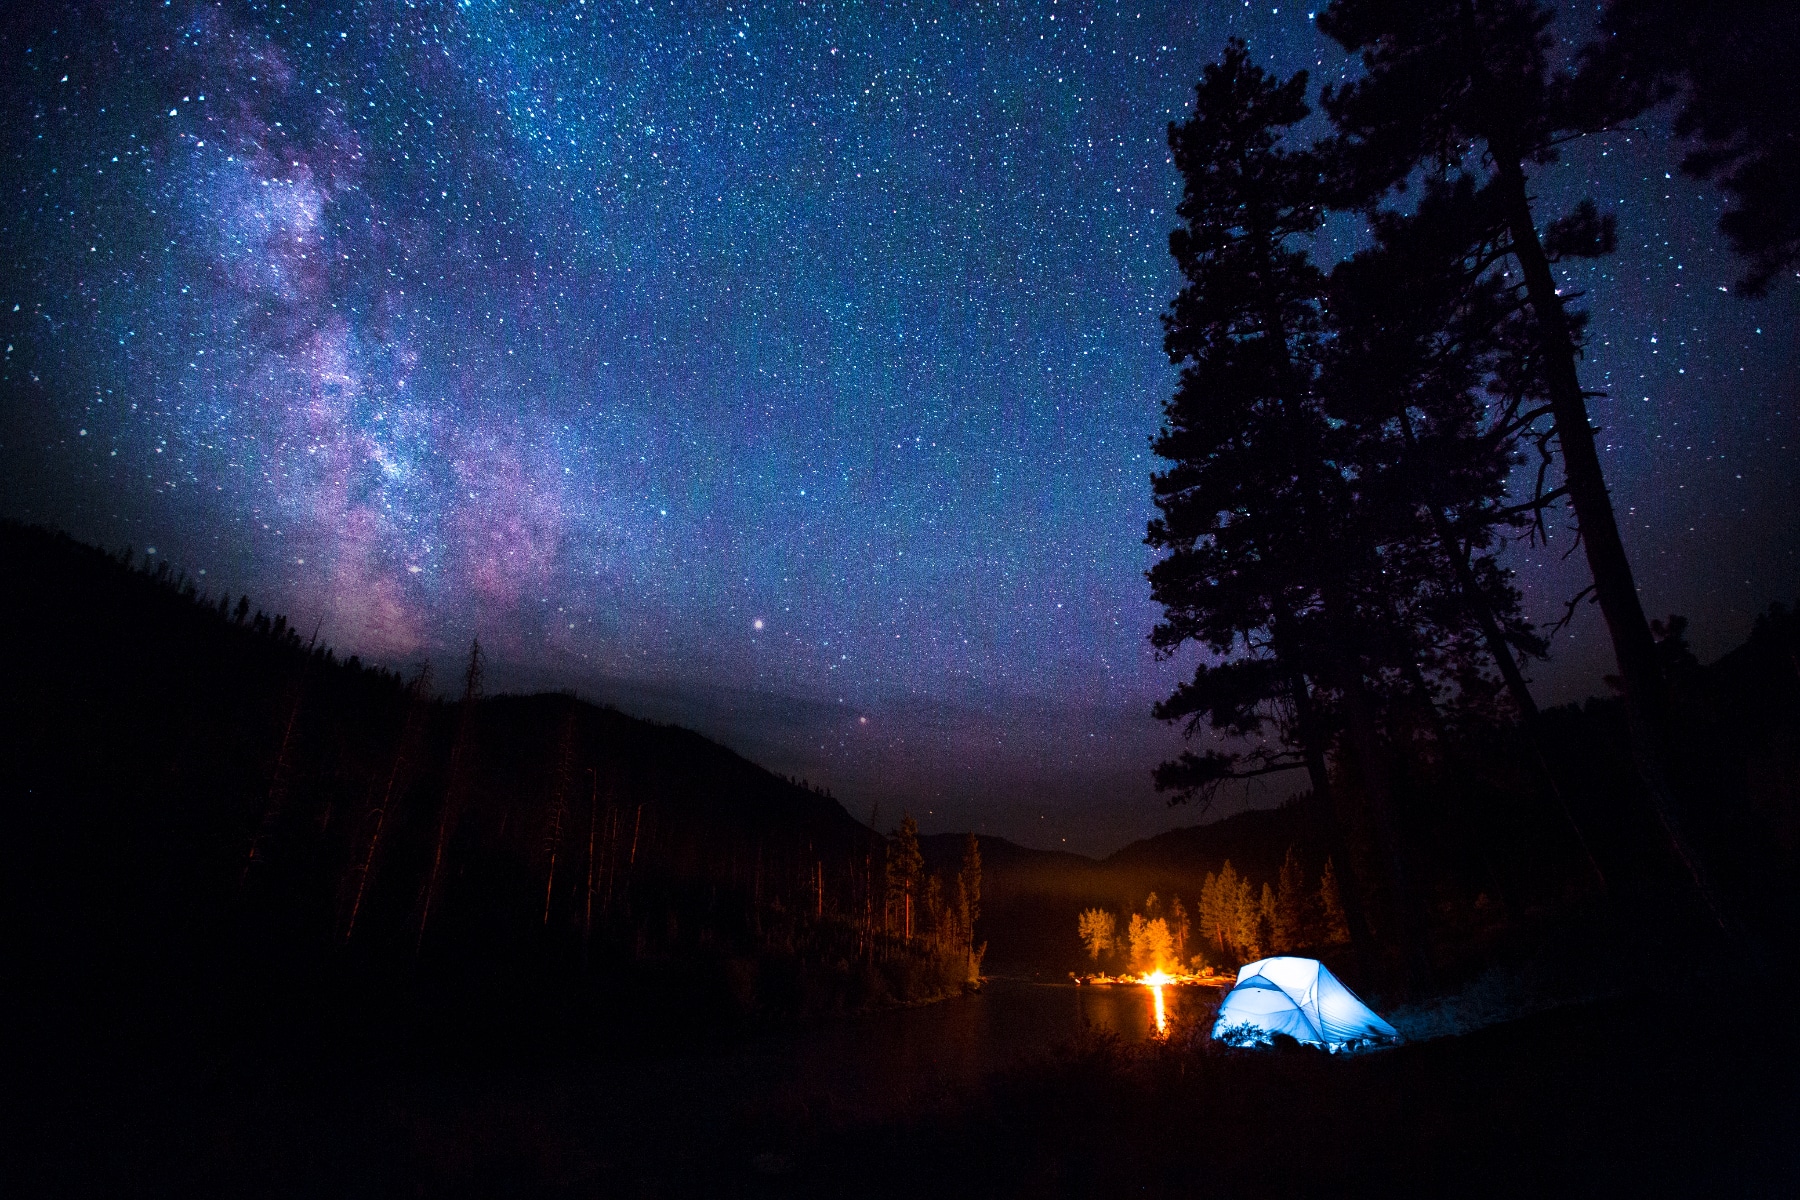 An illuminated tent and campfire under starry skies.